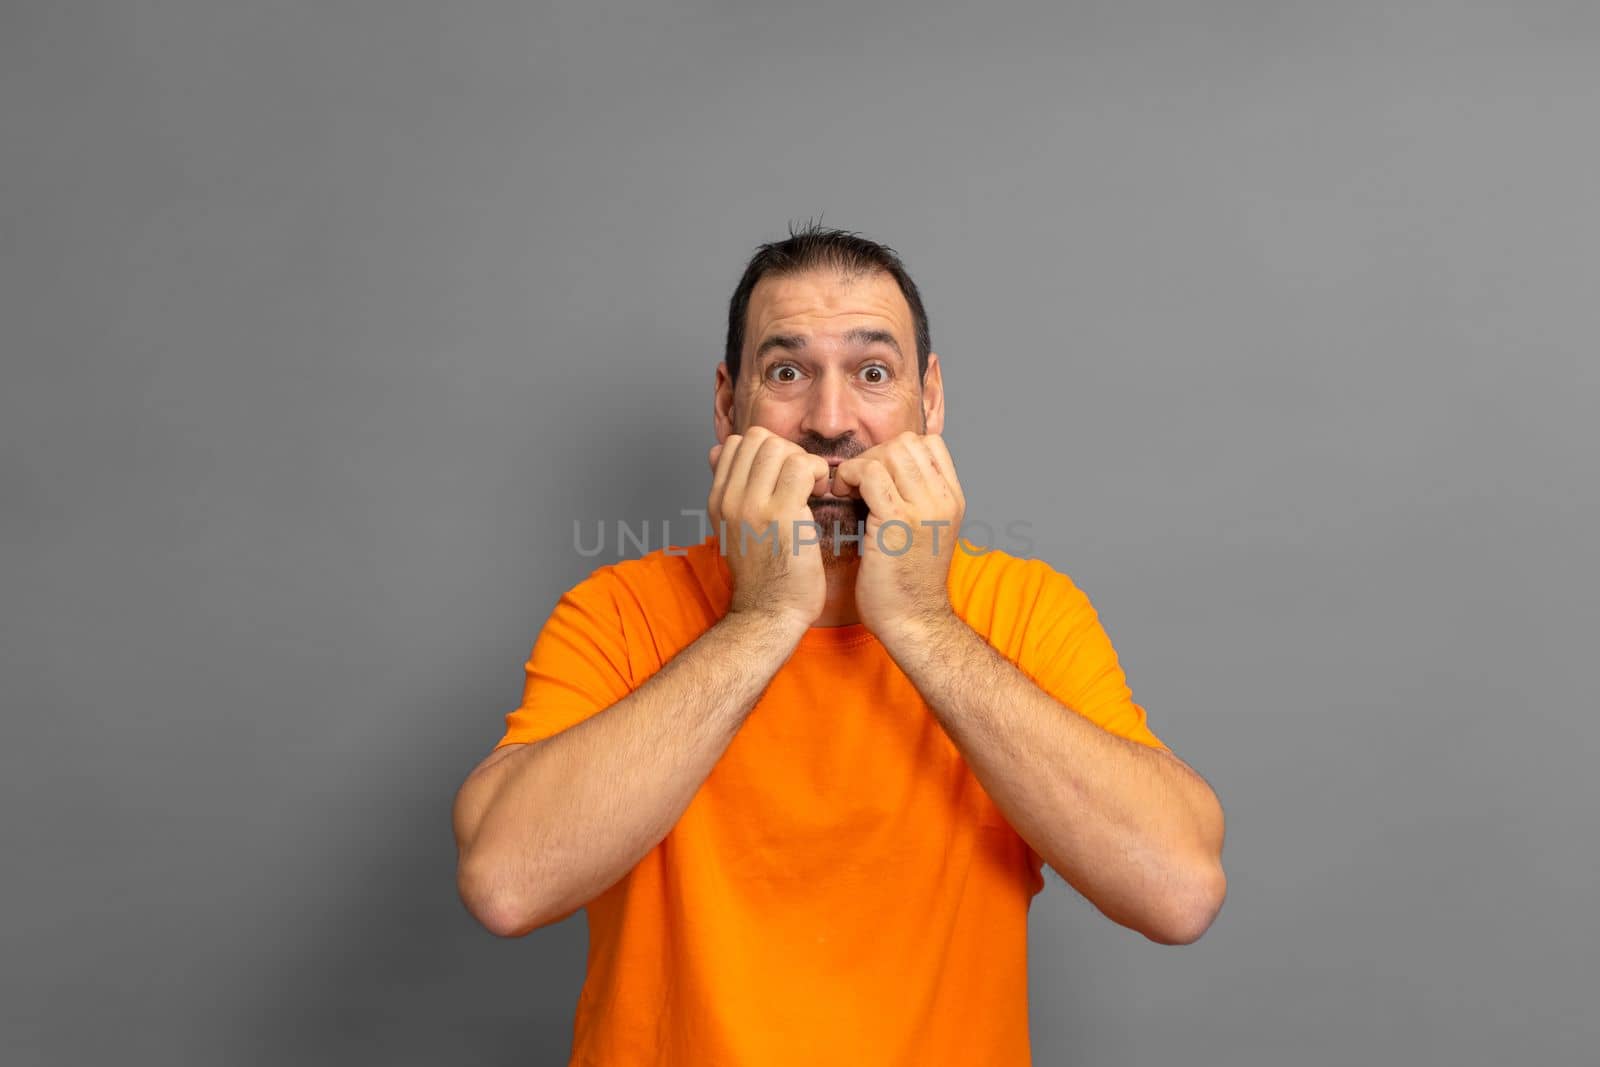 Latino man with a beard in an orange t-shirt biting his nails out of fear, he is experiencing a distressing situation. Isolated on gray background